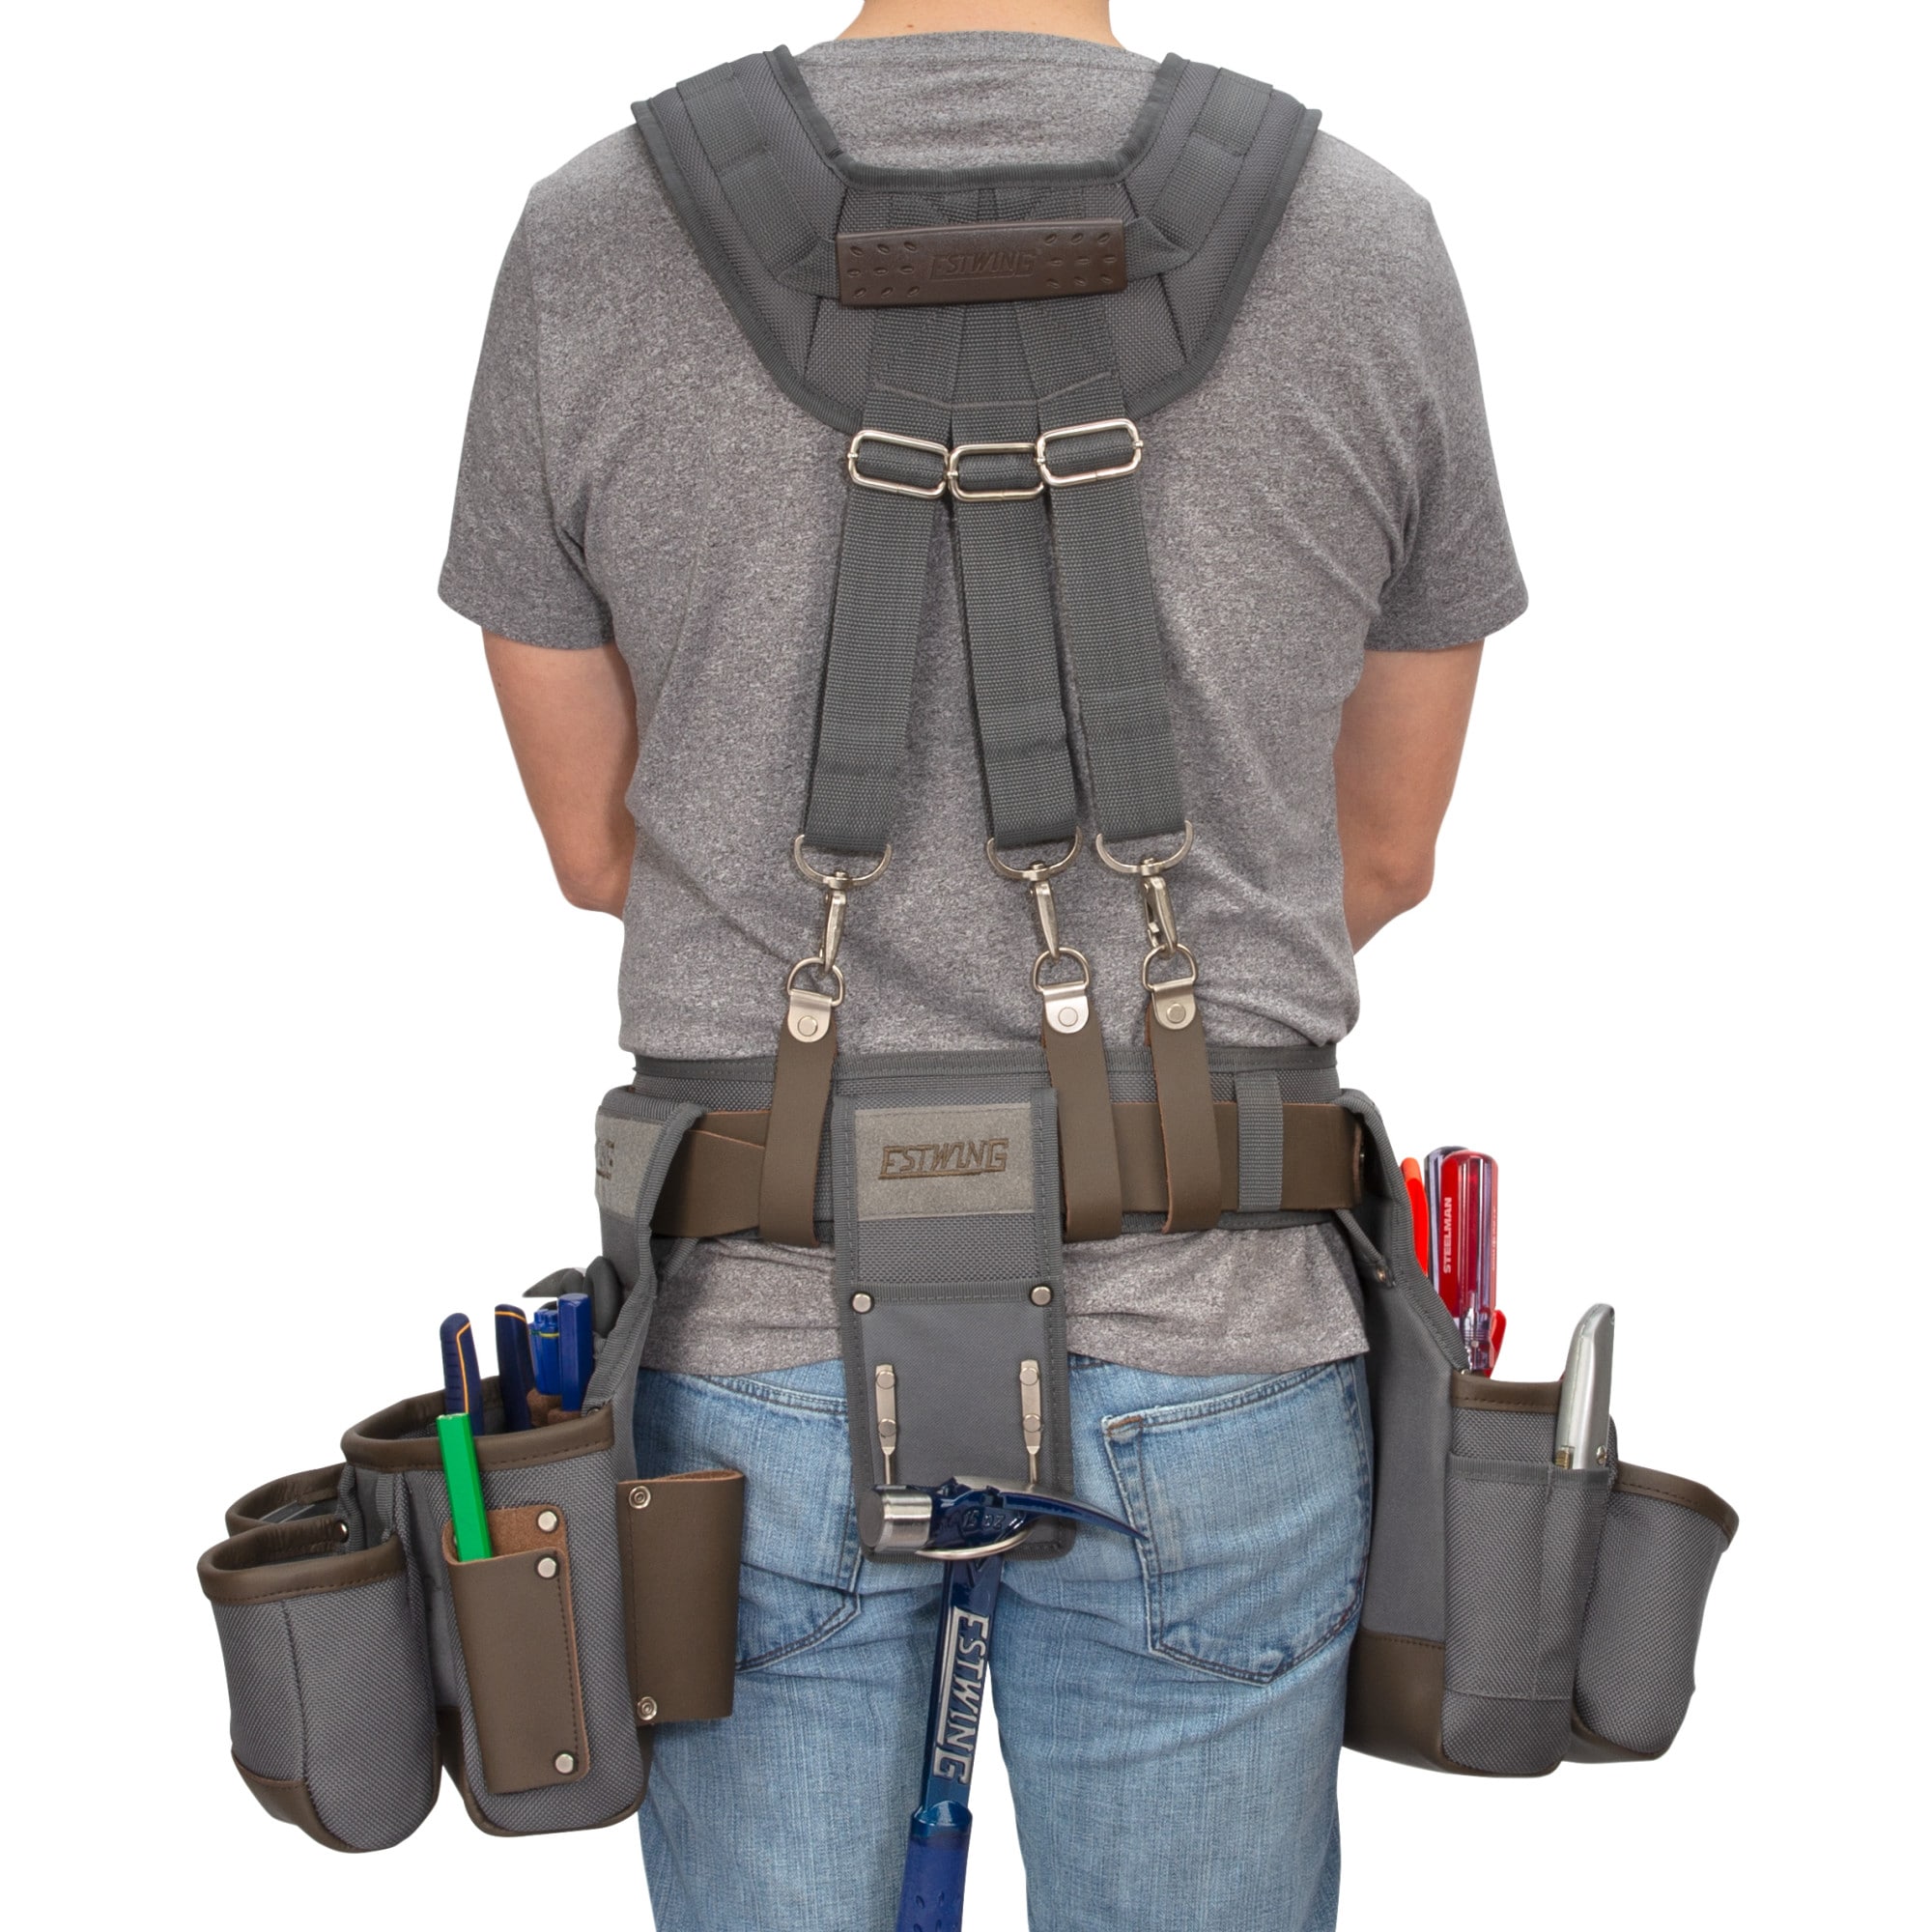 Estwing Framer Polyester Suspension Tool Rig in the Tool Belts